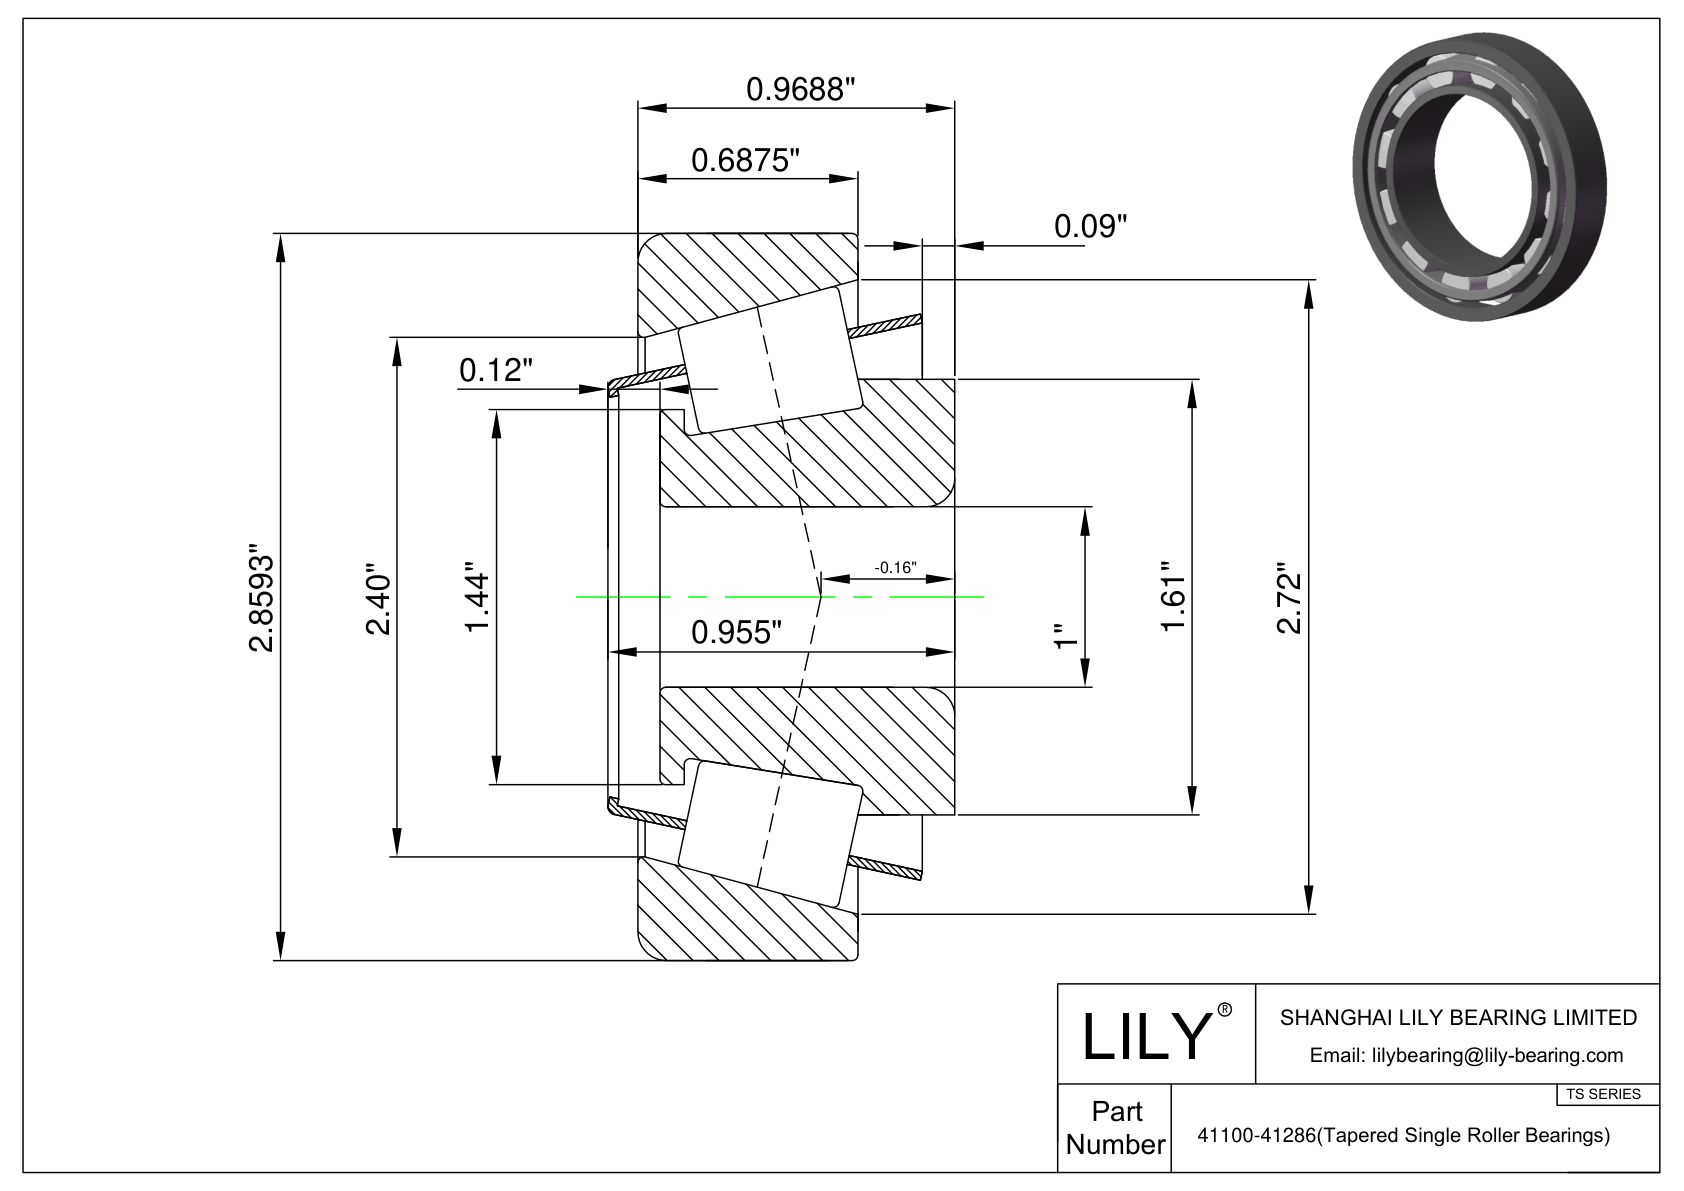 41100-41286 TS (Tapered Single Roller Bearings) (Imperial) cad drawing